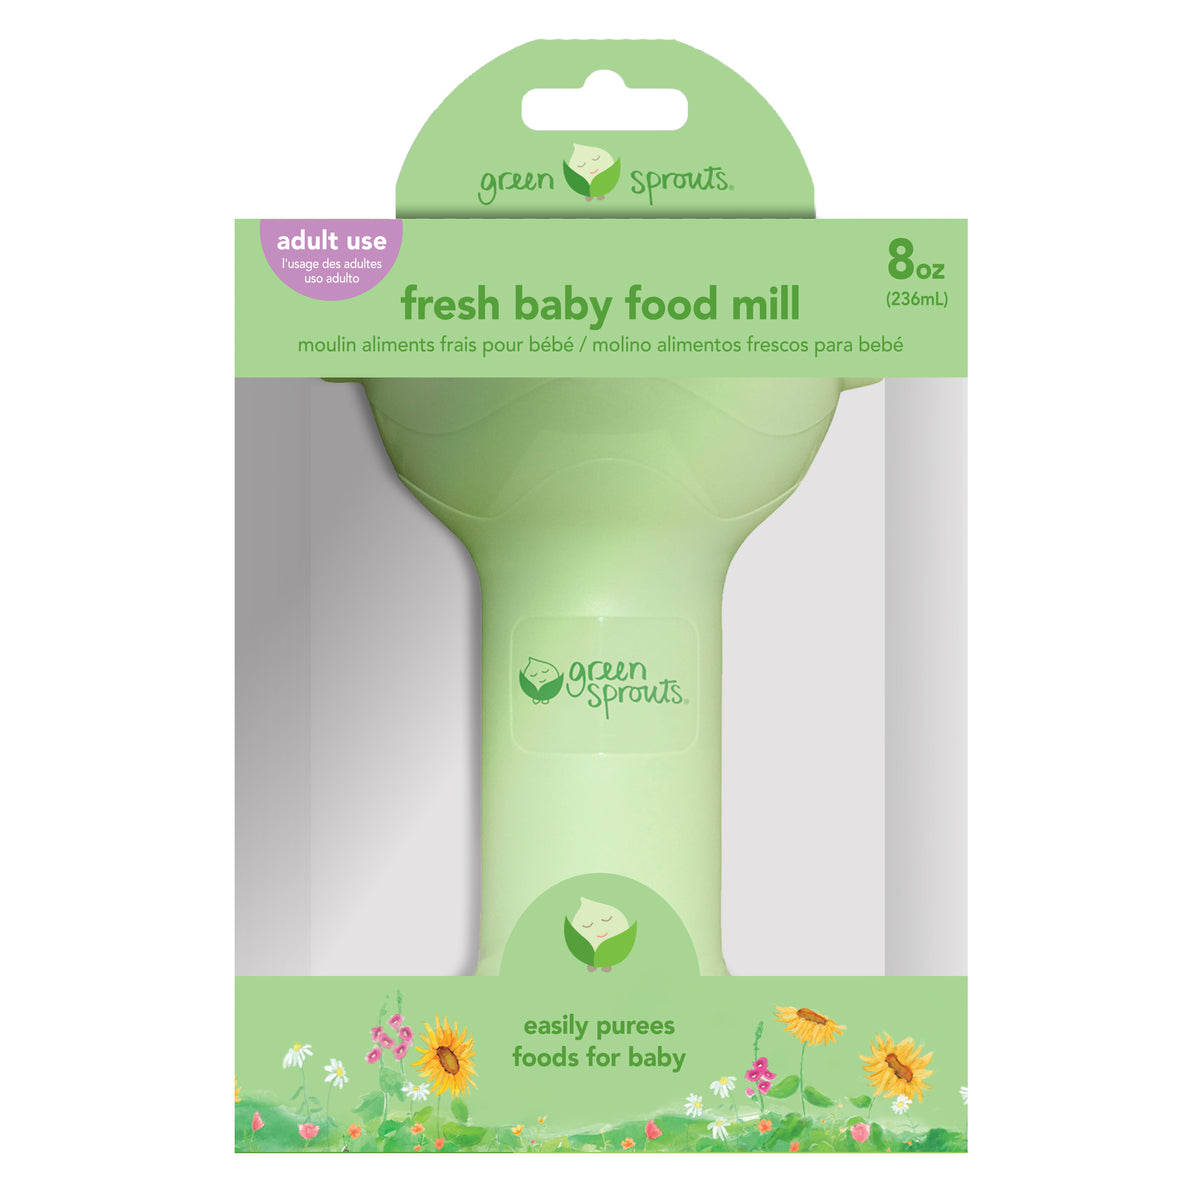 Fresh Baby Food Mill  green sprouts®– Green Sprouts Retailer